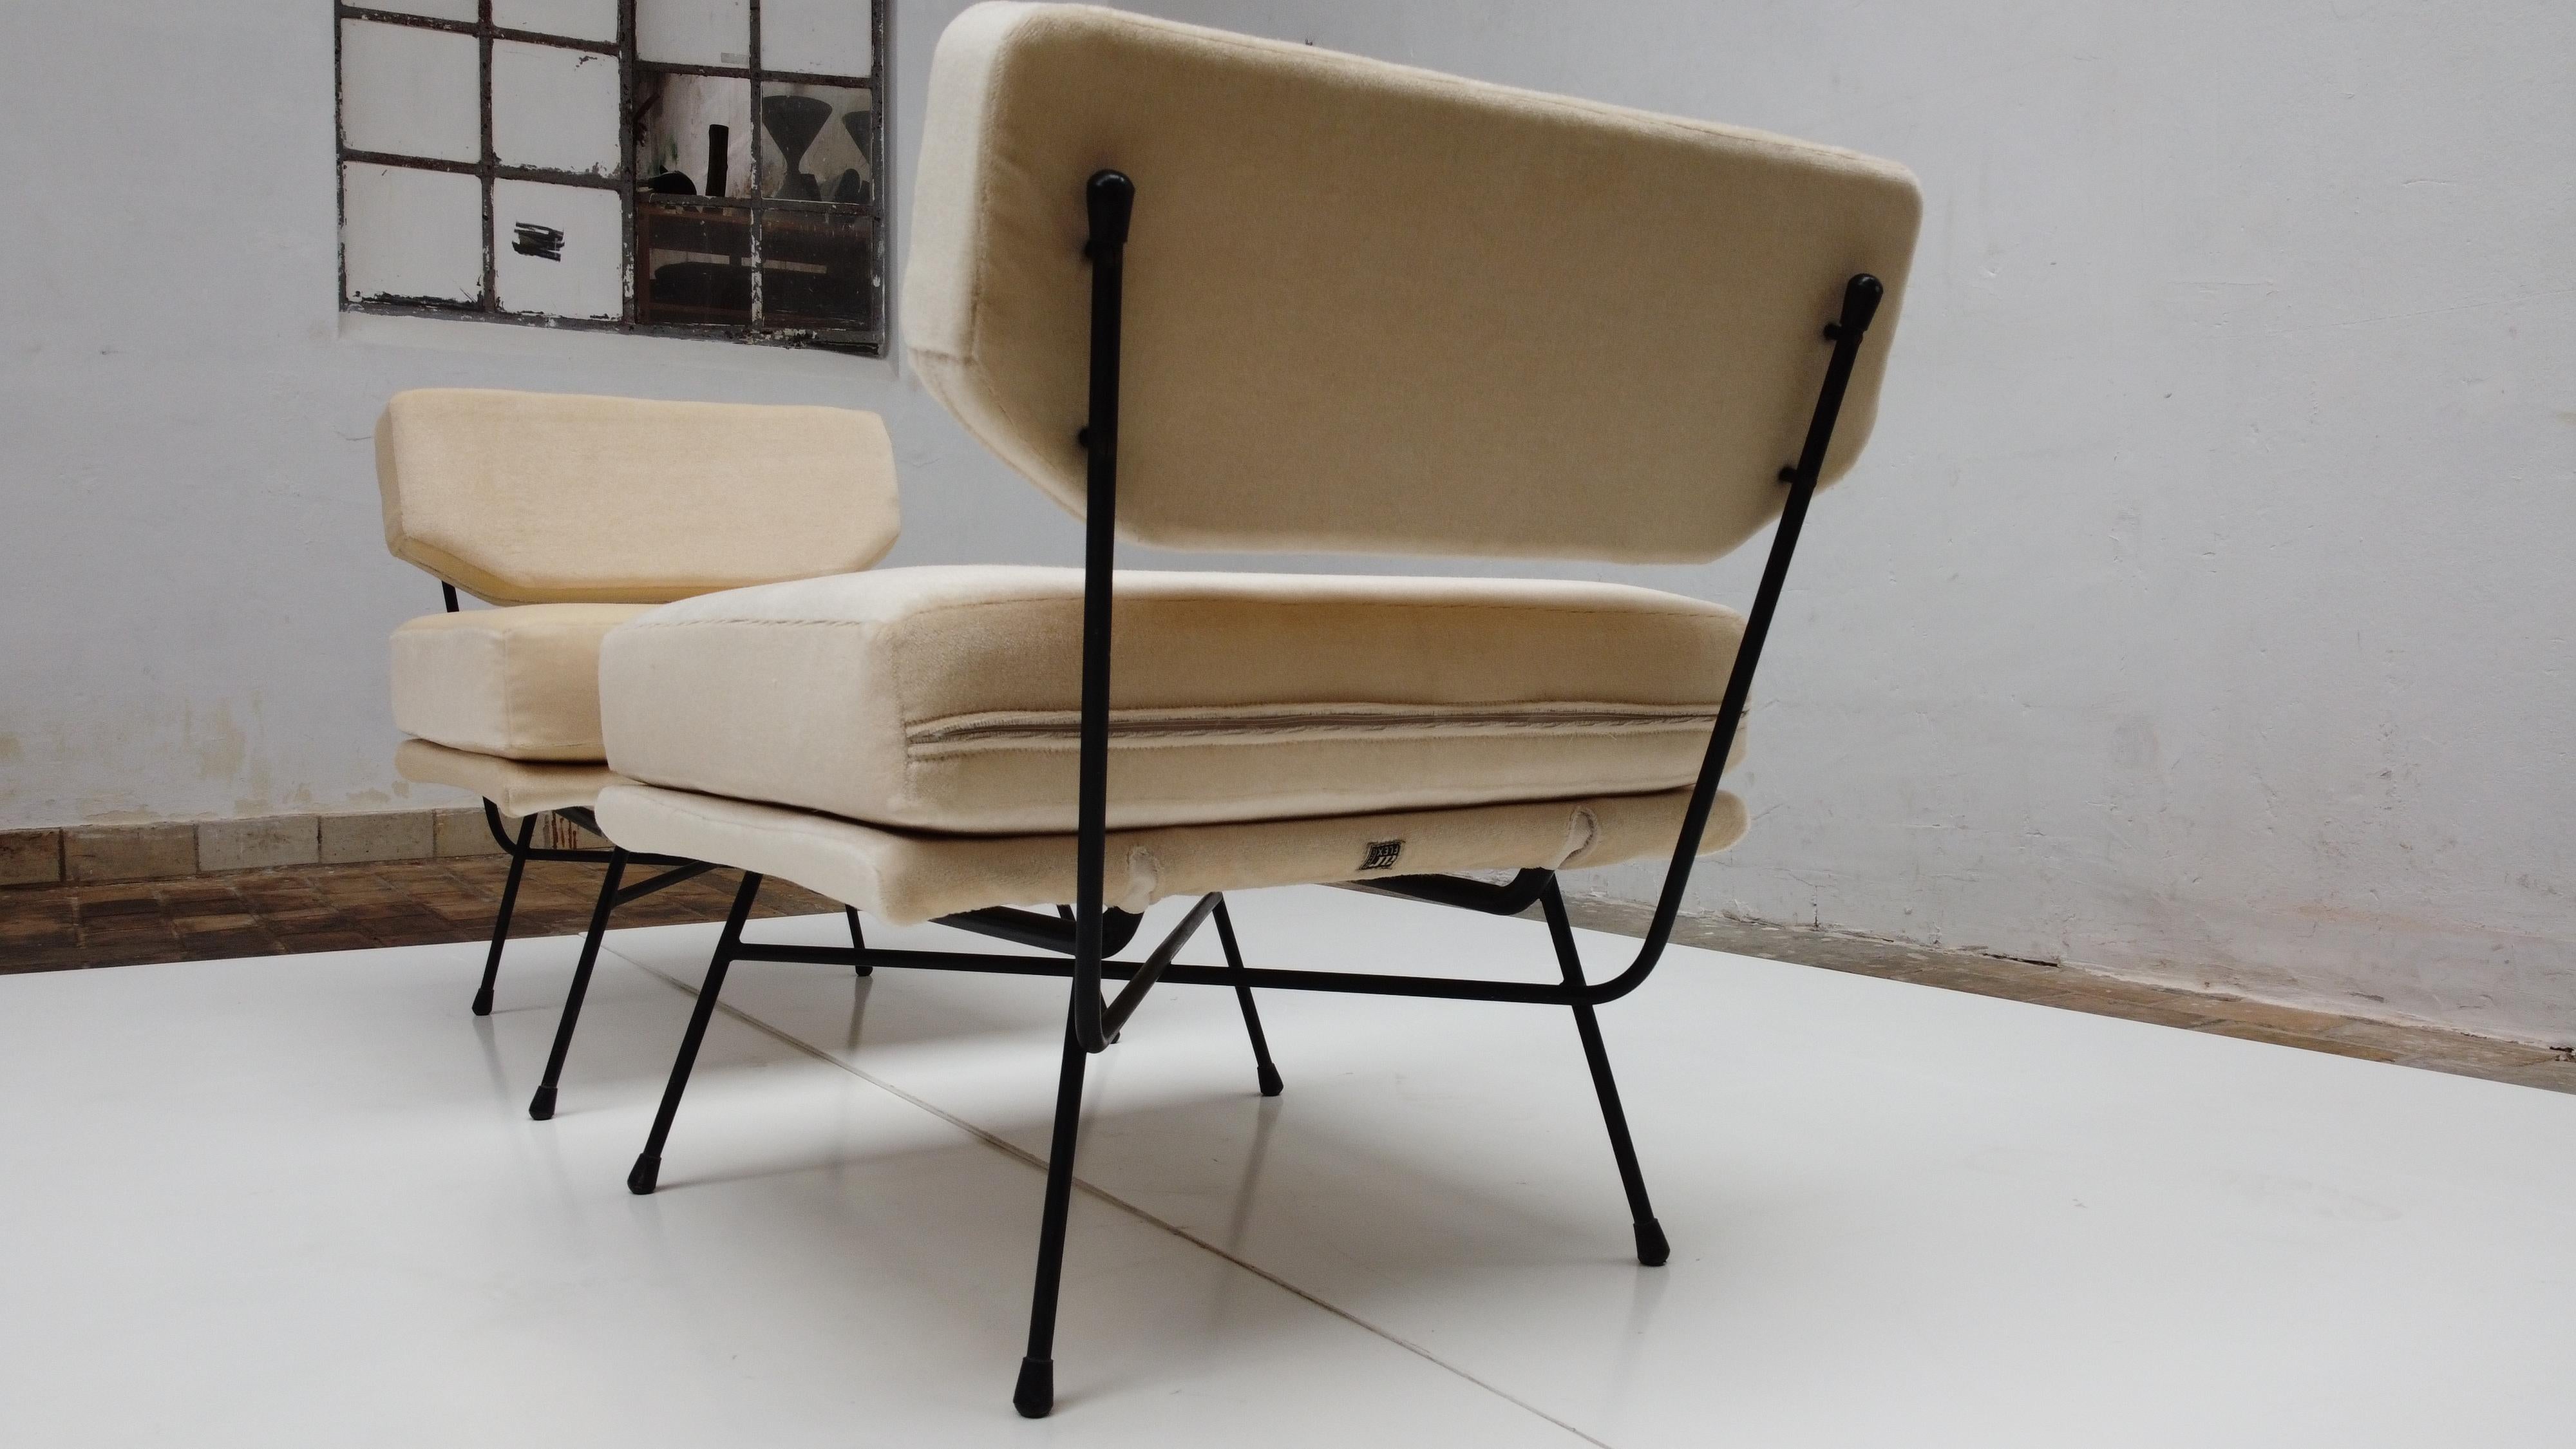 Pair of 'Elettra' Lounge Chairs by BBPR, Arflex, Italy 1953, Compasso D'Oro 1954 In Good Condition For Sale In bergen op zoom, NL